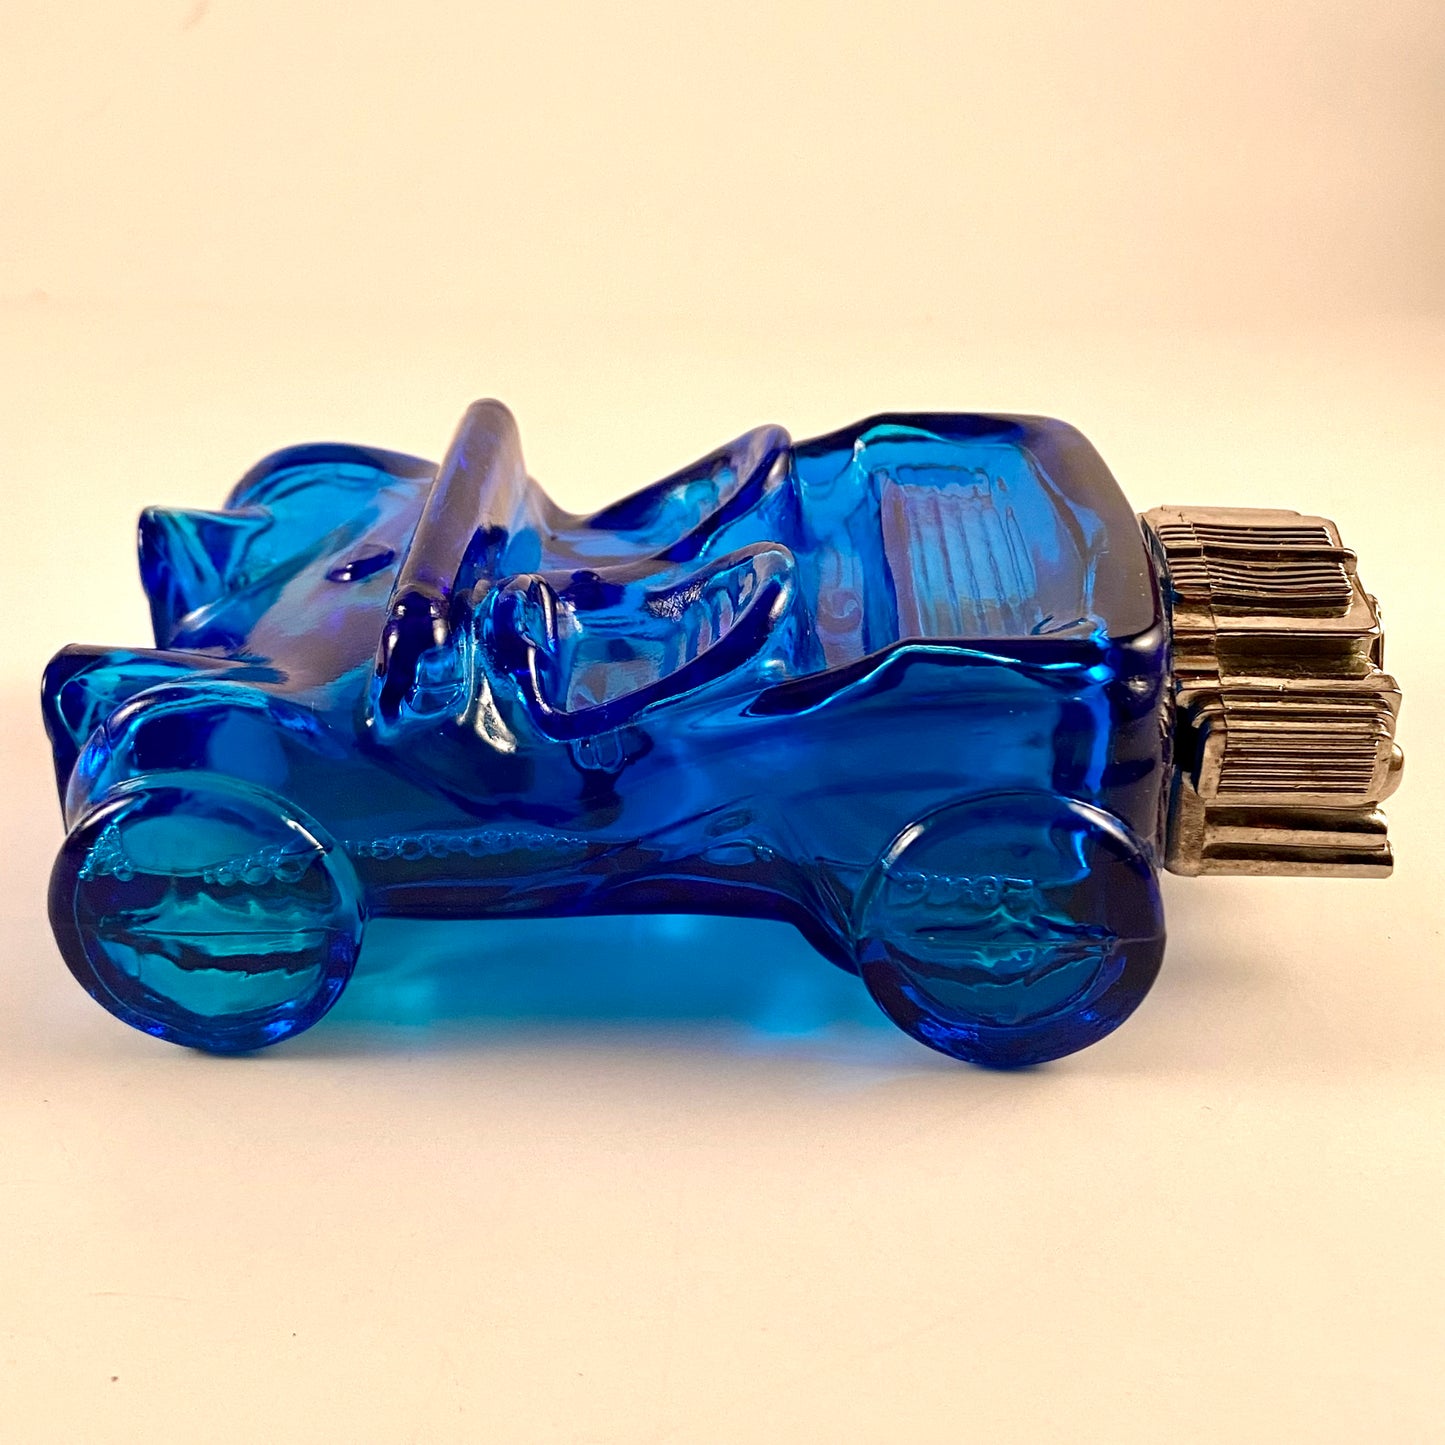 1971-1973 Avon Dune Buggy Cologne Decanter Bottle- Partially Filled